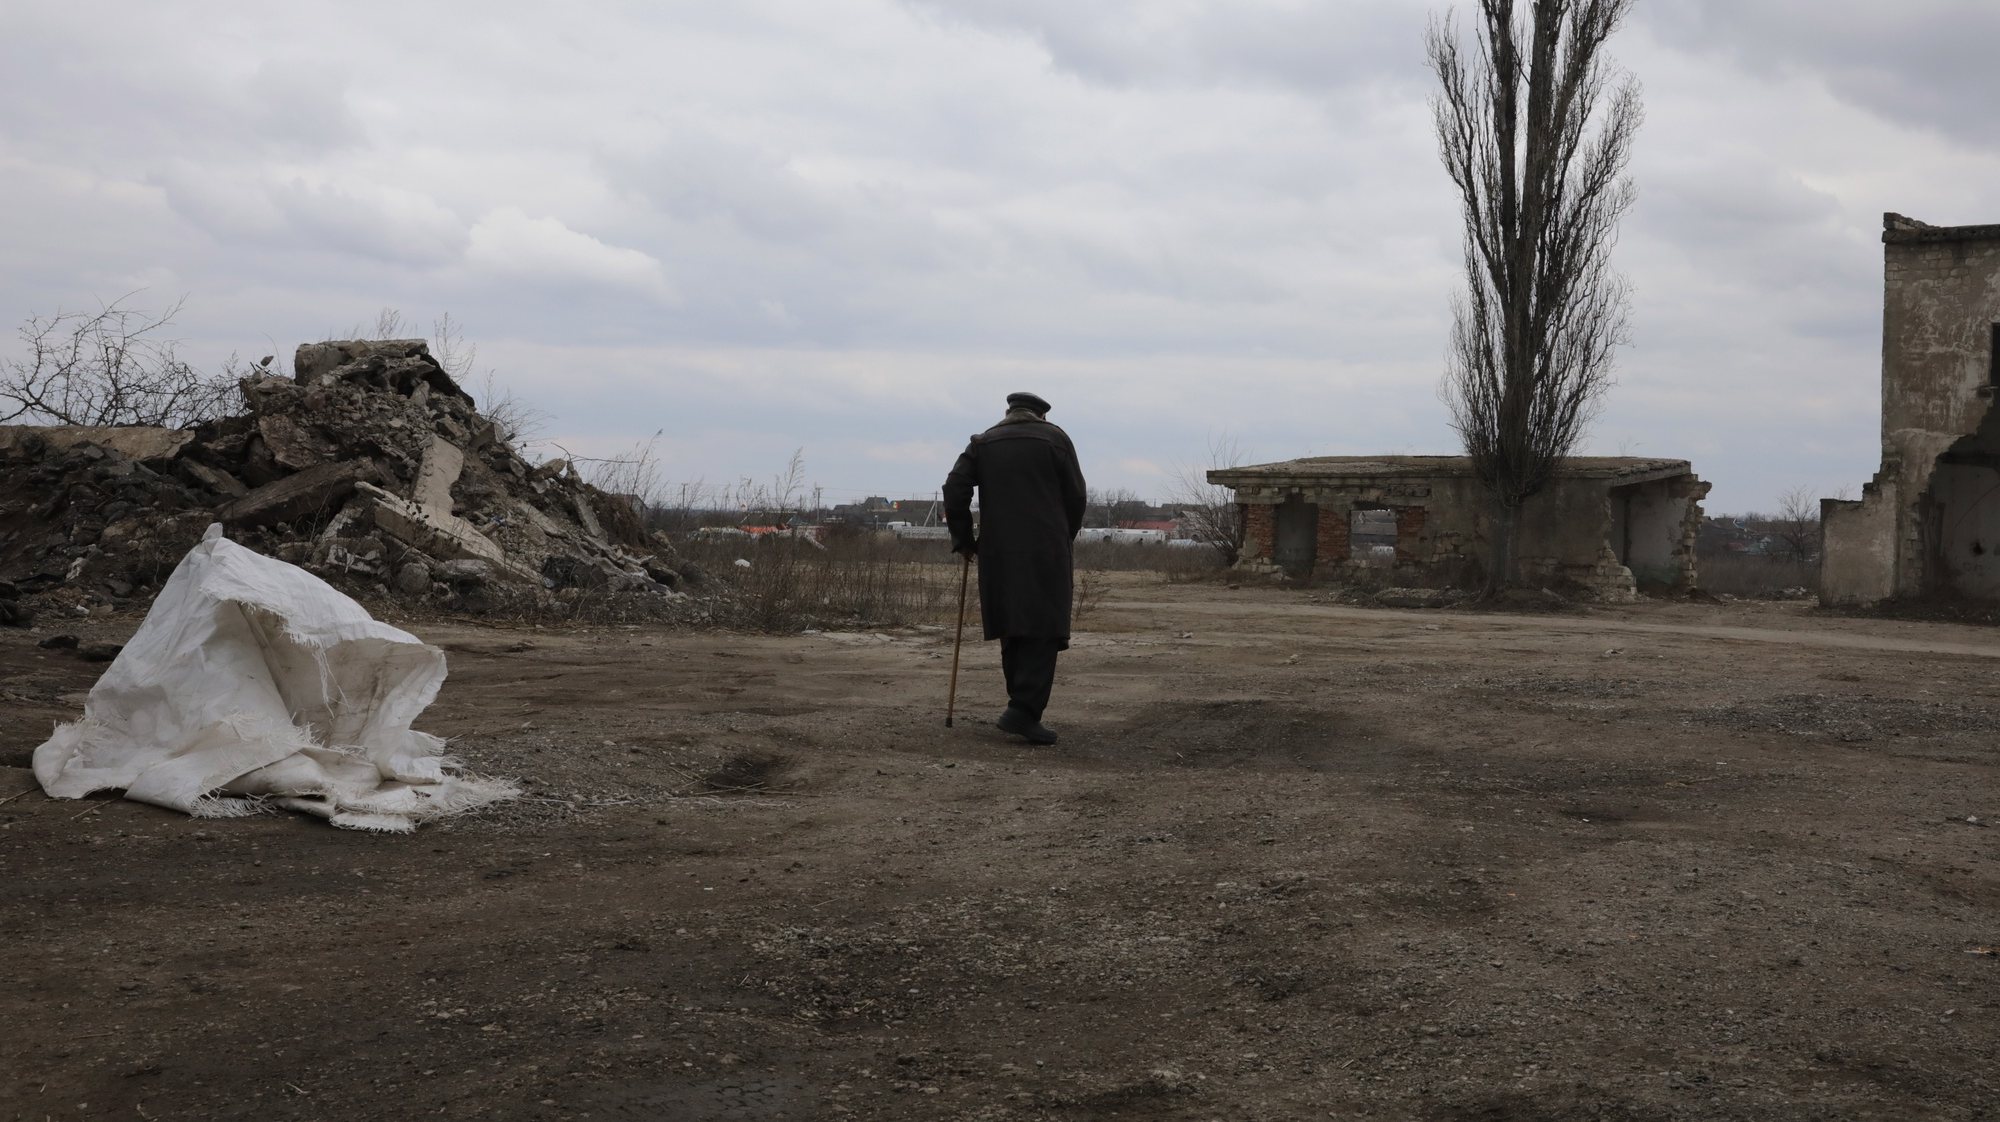 epa09821376 A Ukrainian elderly man who fled heavy fighting in Kherson heads  towards a tent area  to rest (not seen in the picture), at the refugees reception center, near Palanca, Moldova, 13 March 2022. Refugees upon their entry to Moldova board a minibus to a nearby reception center where they receive a warm drink then embark on a trip to the capital Chisinau, Poland, or Germany. Seventeen days into the Russian invasion of Ukraine the numbers of refugees fleeing the conflict to neighboring countries continues to increase, according to the UNHCR. Moldova has until 13 March received about 299,573 refugees, some 198,897 left to other EU countries and 100,676 chose to stay. The same day, residents of the Ukrainian cities Nykolaiv, Odessa and areas nearby continue to stream into Moldova while a few others went back to Ukraine, either because they want to bring more personal items, to check on their property, or because they feel overwhelmed and want to return home in spite of the danger.  EPA/AMEL PAIN